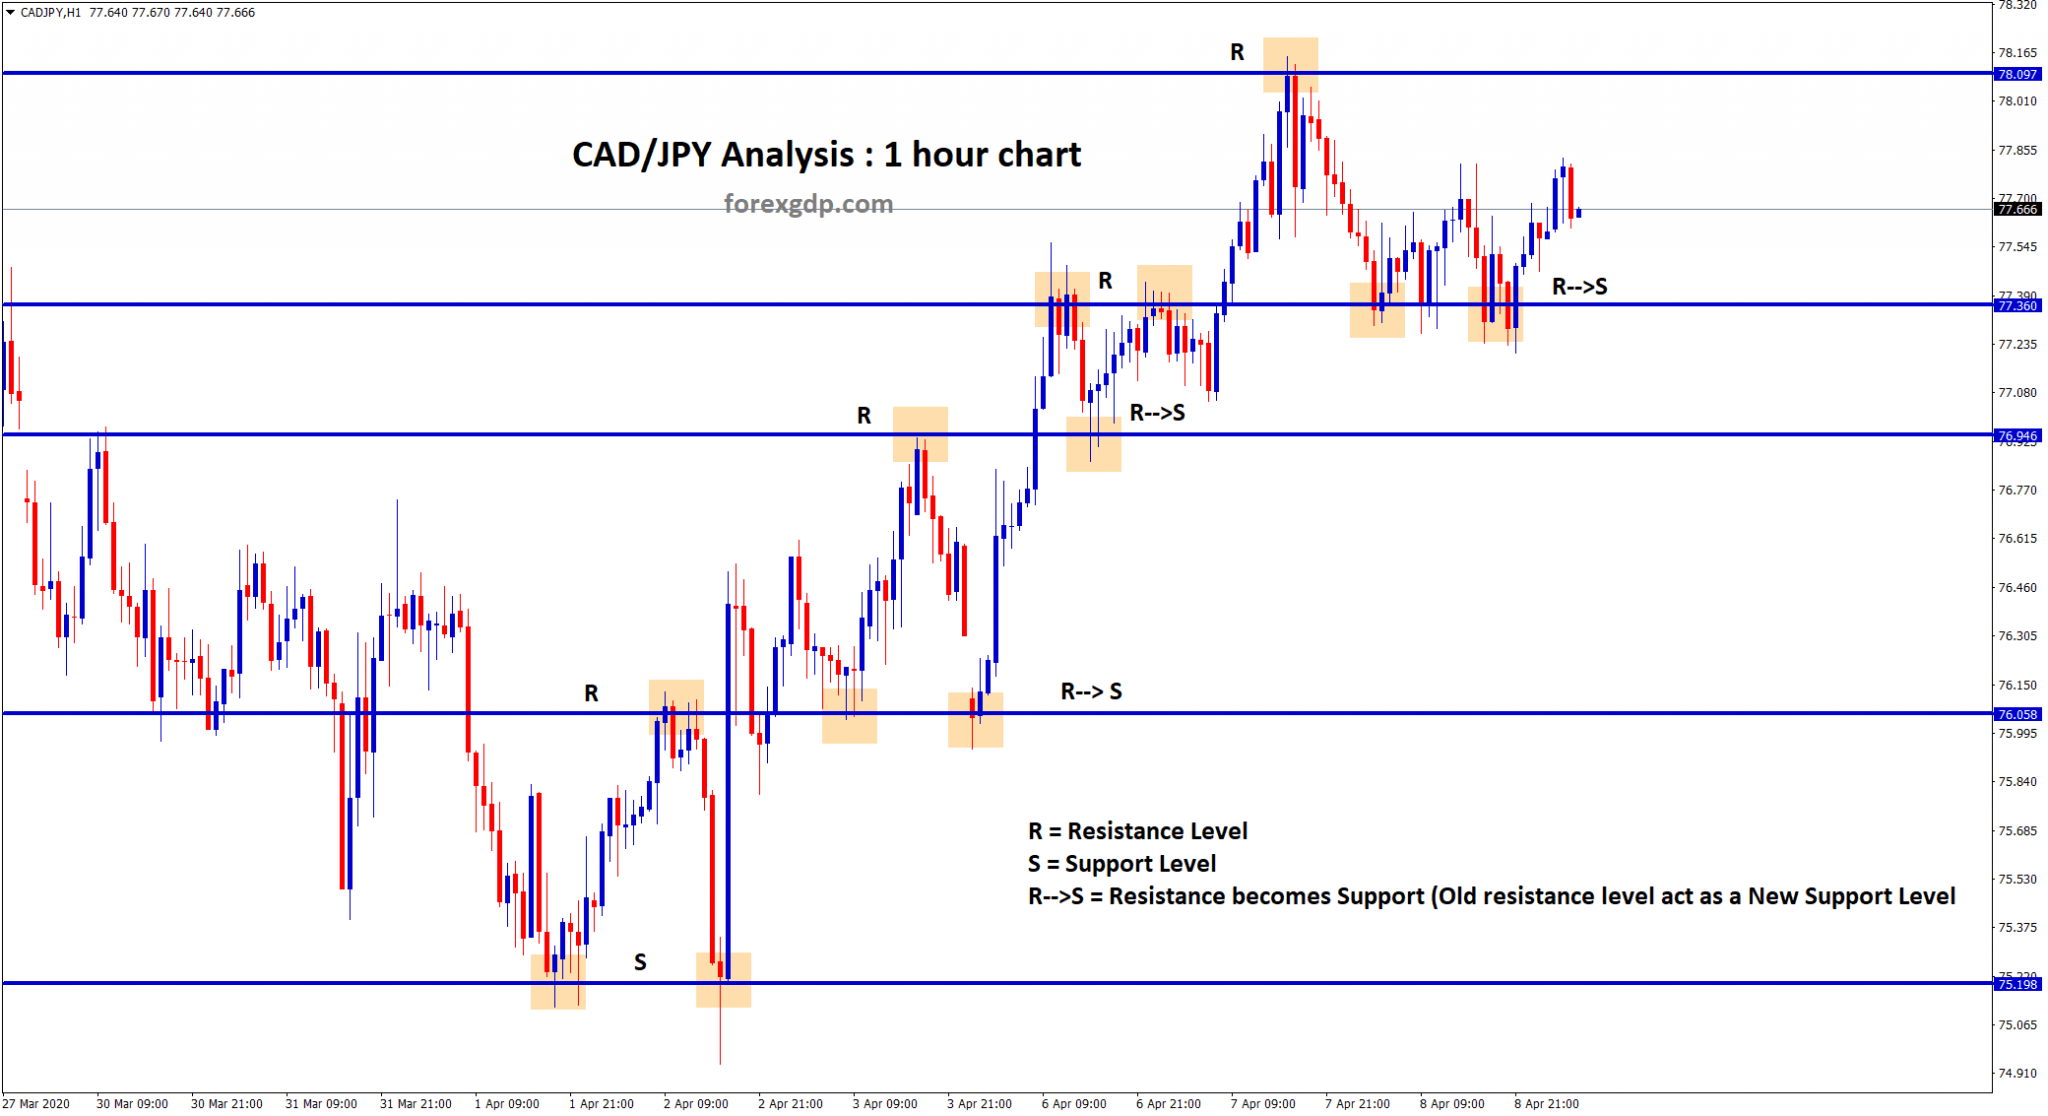 Old resistance becomes new support level in cad jpy forex chart